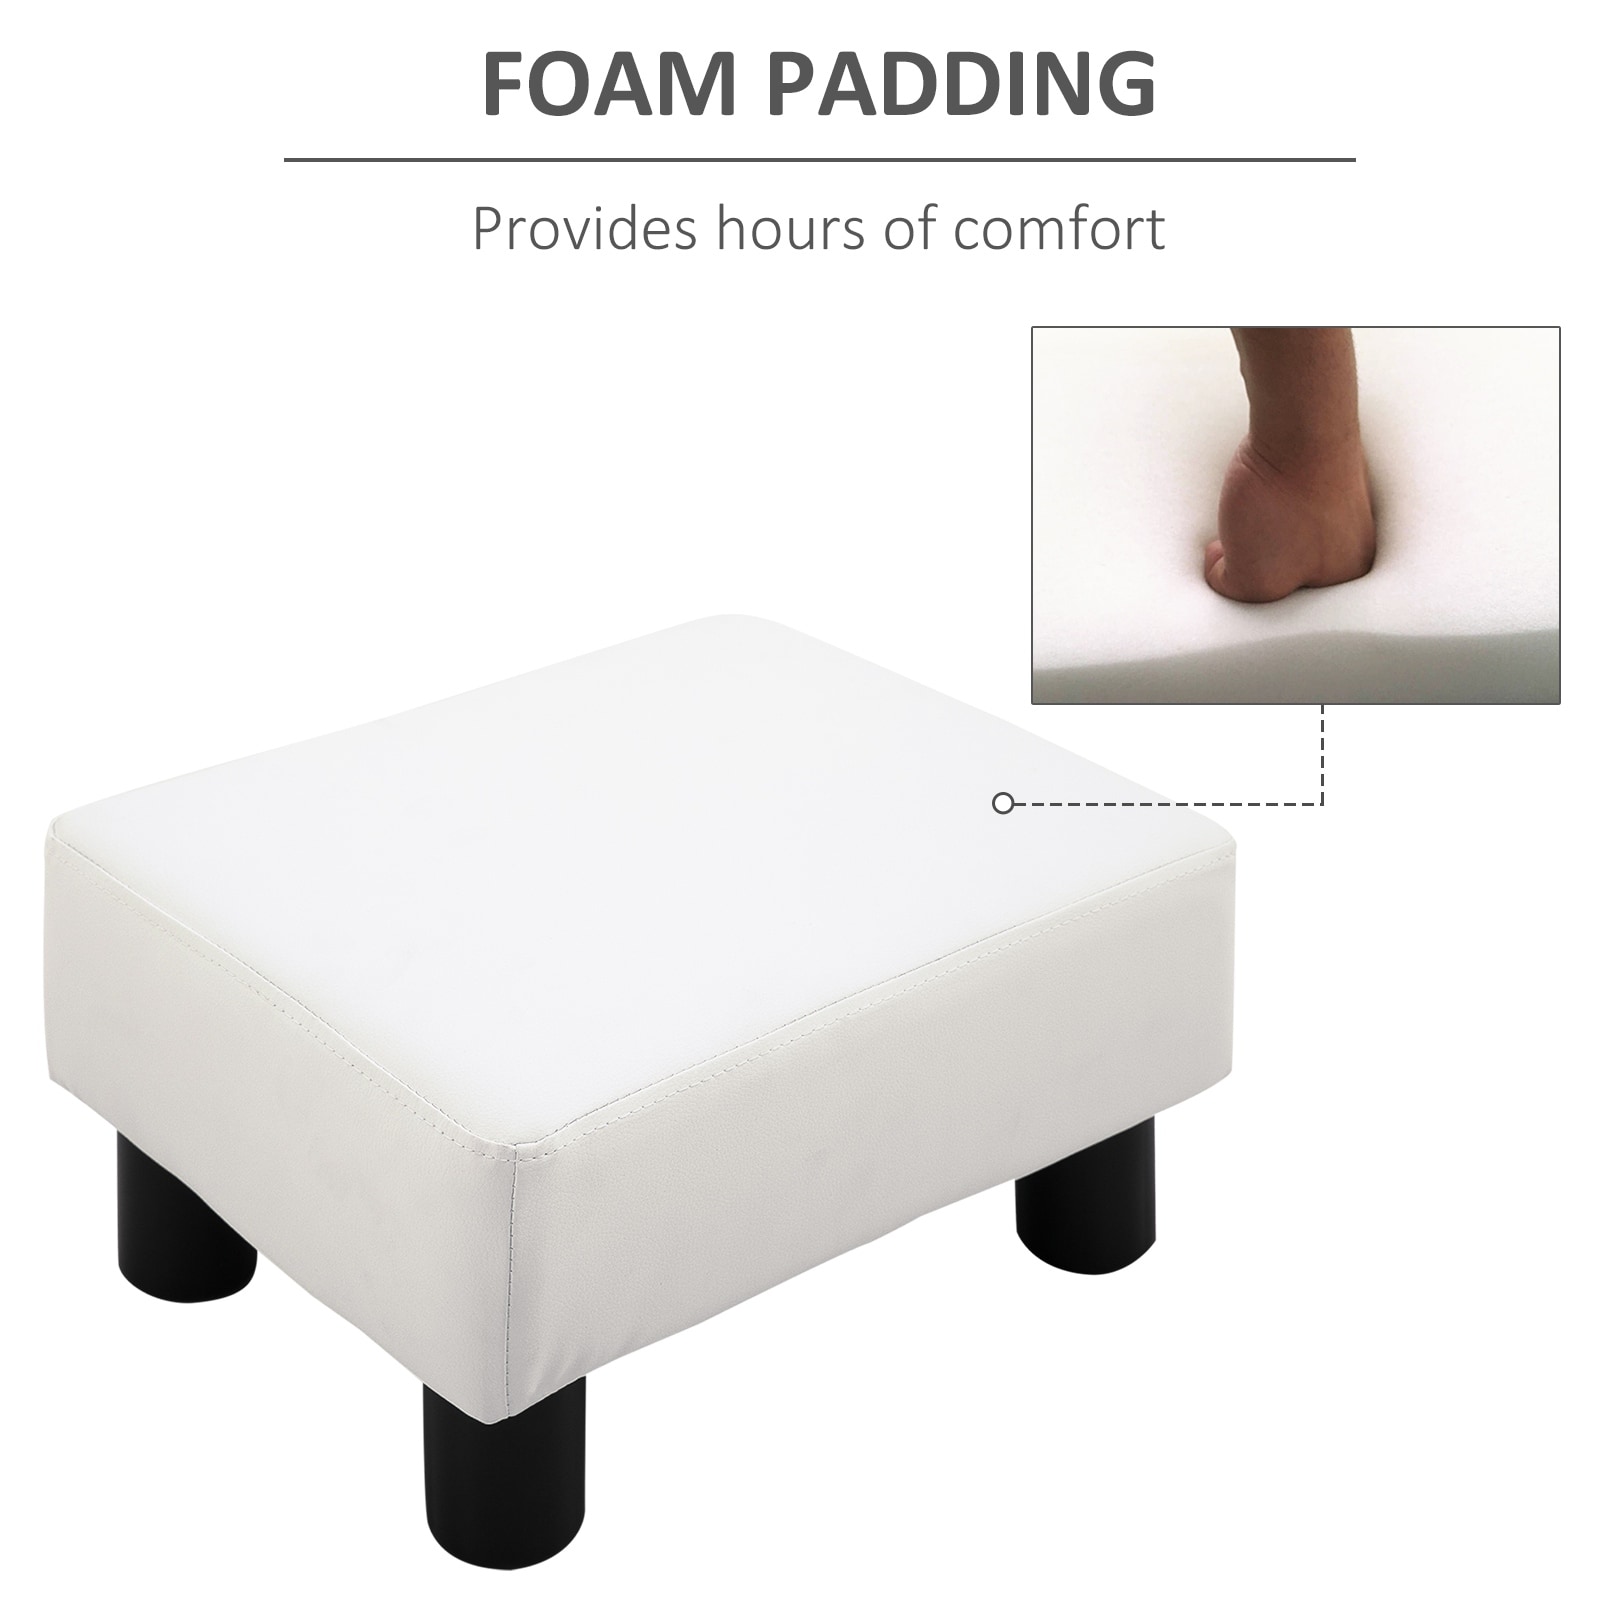 https://ak1.ostkcdn.com/images/products/is/images/direct/75e00b2a1ac499acb84e0c9c3016d47e16a75434/HOMCOM-Modern-Faux-Leather-Upholstered-Rectangular-Ottoman-Footrest-with-Padded-Foam-Seat-and-Plastic-Legs%2C-Bright-White.jpg